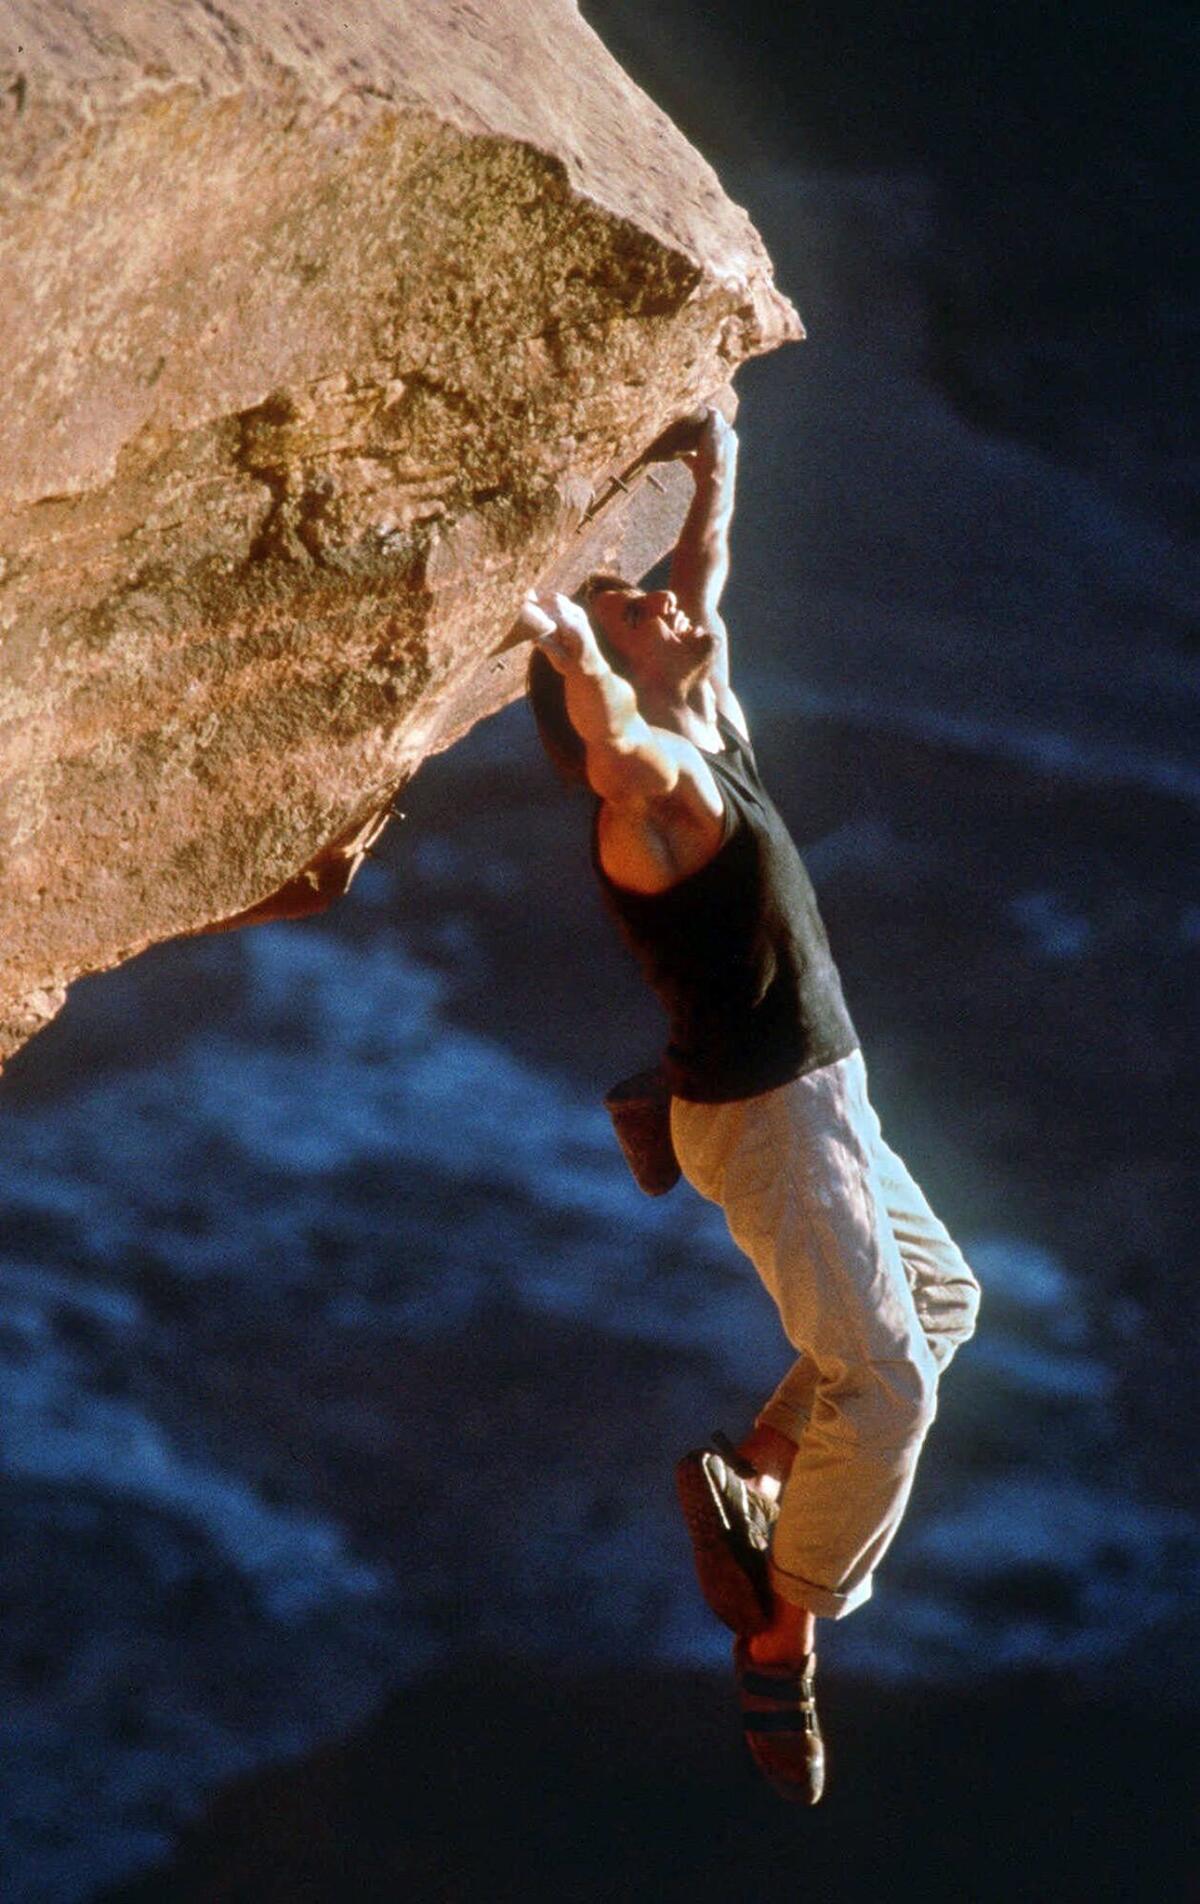 Tom Cruise hangs from a cornice while mountain climbing in a scene from the film "Mission: Impossible 2."